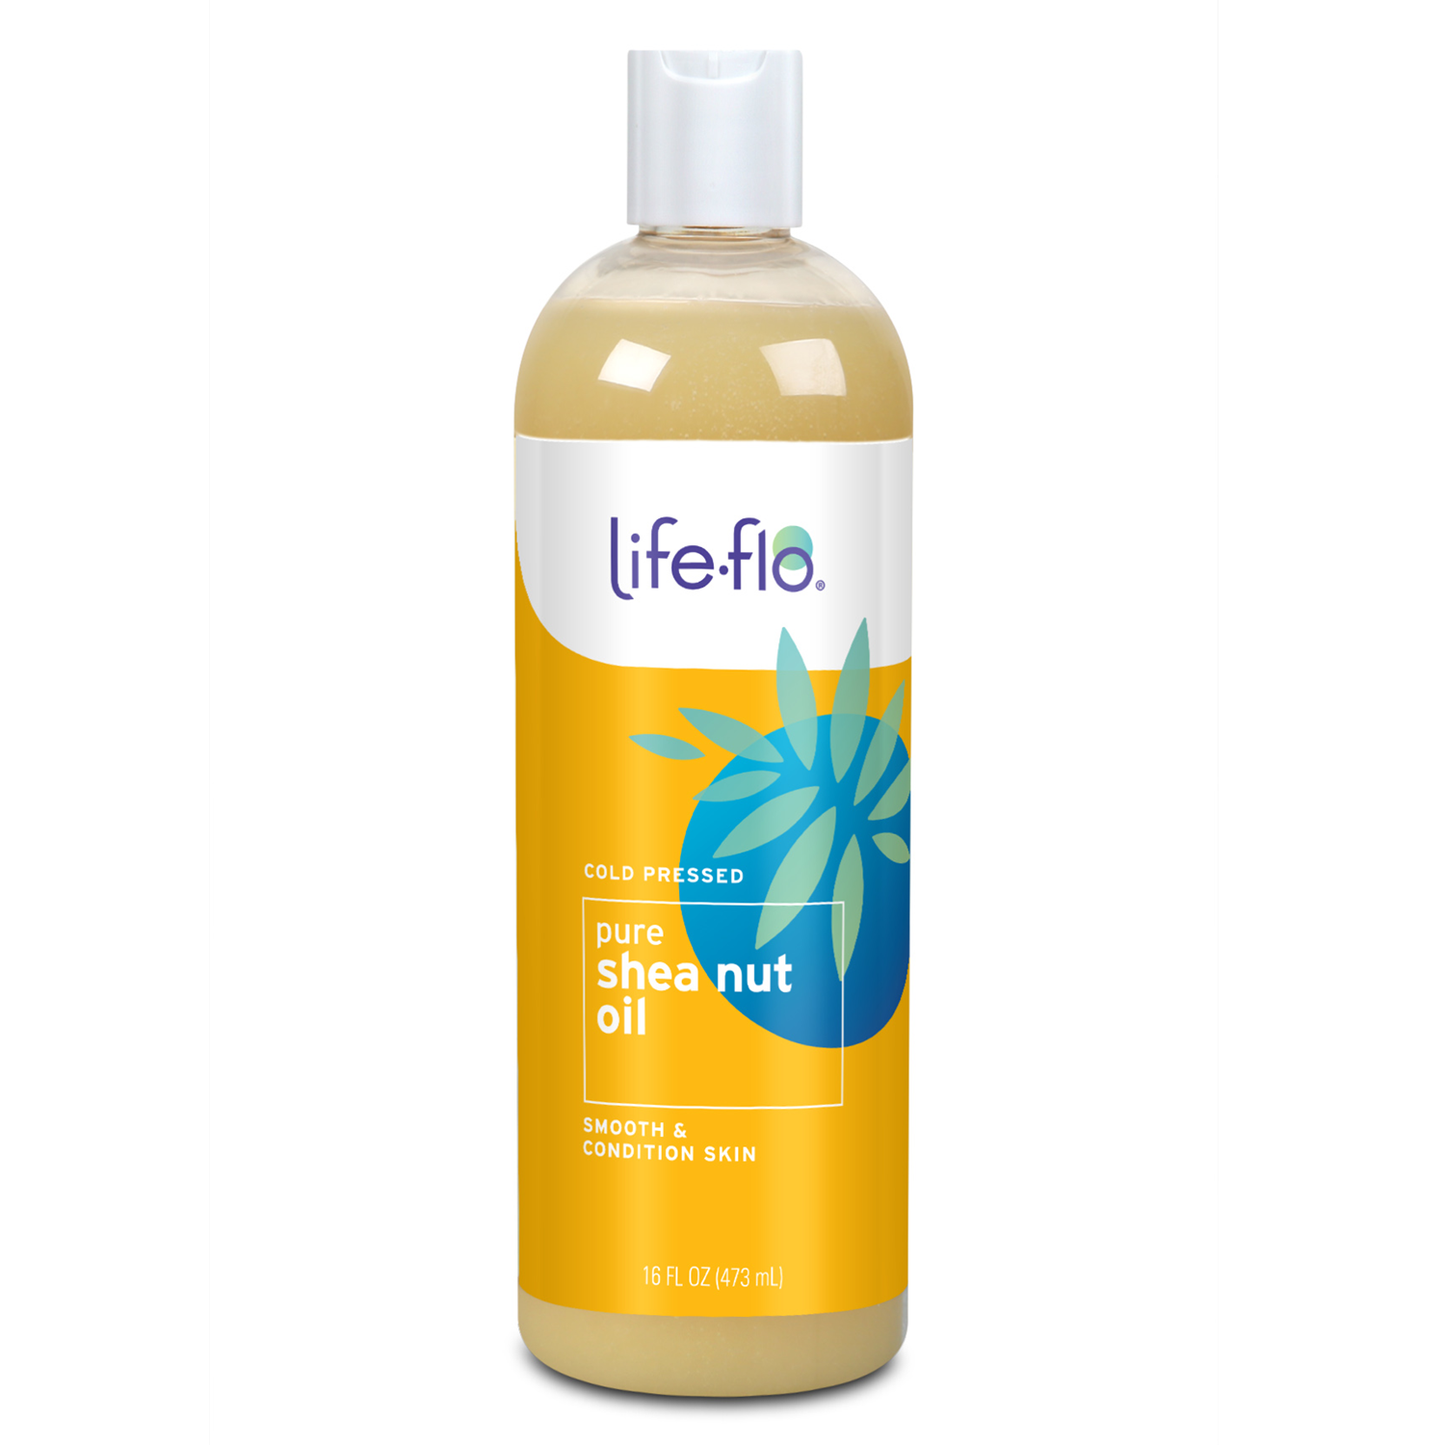 Life-flo Pure Shea Nut Oil, Cold Pressed, Hair Care, Skin Care, Multi-Purpose Body Oil Nourishes Dry Hair and Skin, Stays Liquid at Room Temperature, 60 Day Guarantee, Not Tested on Animals, 16oz